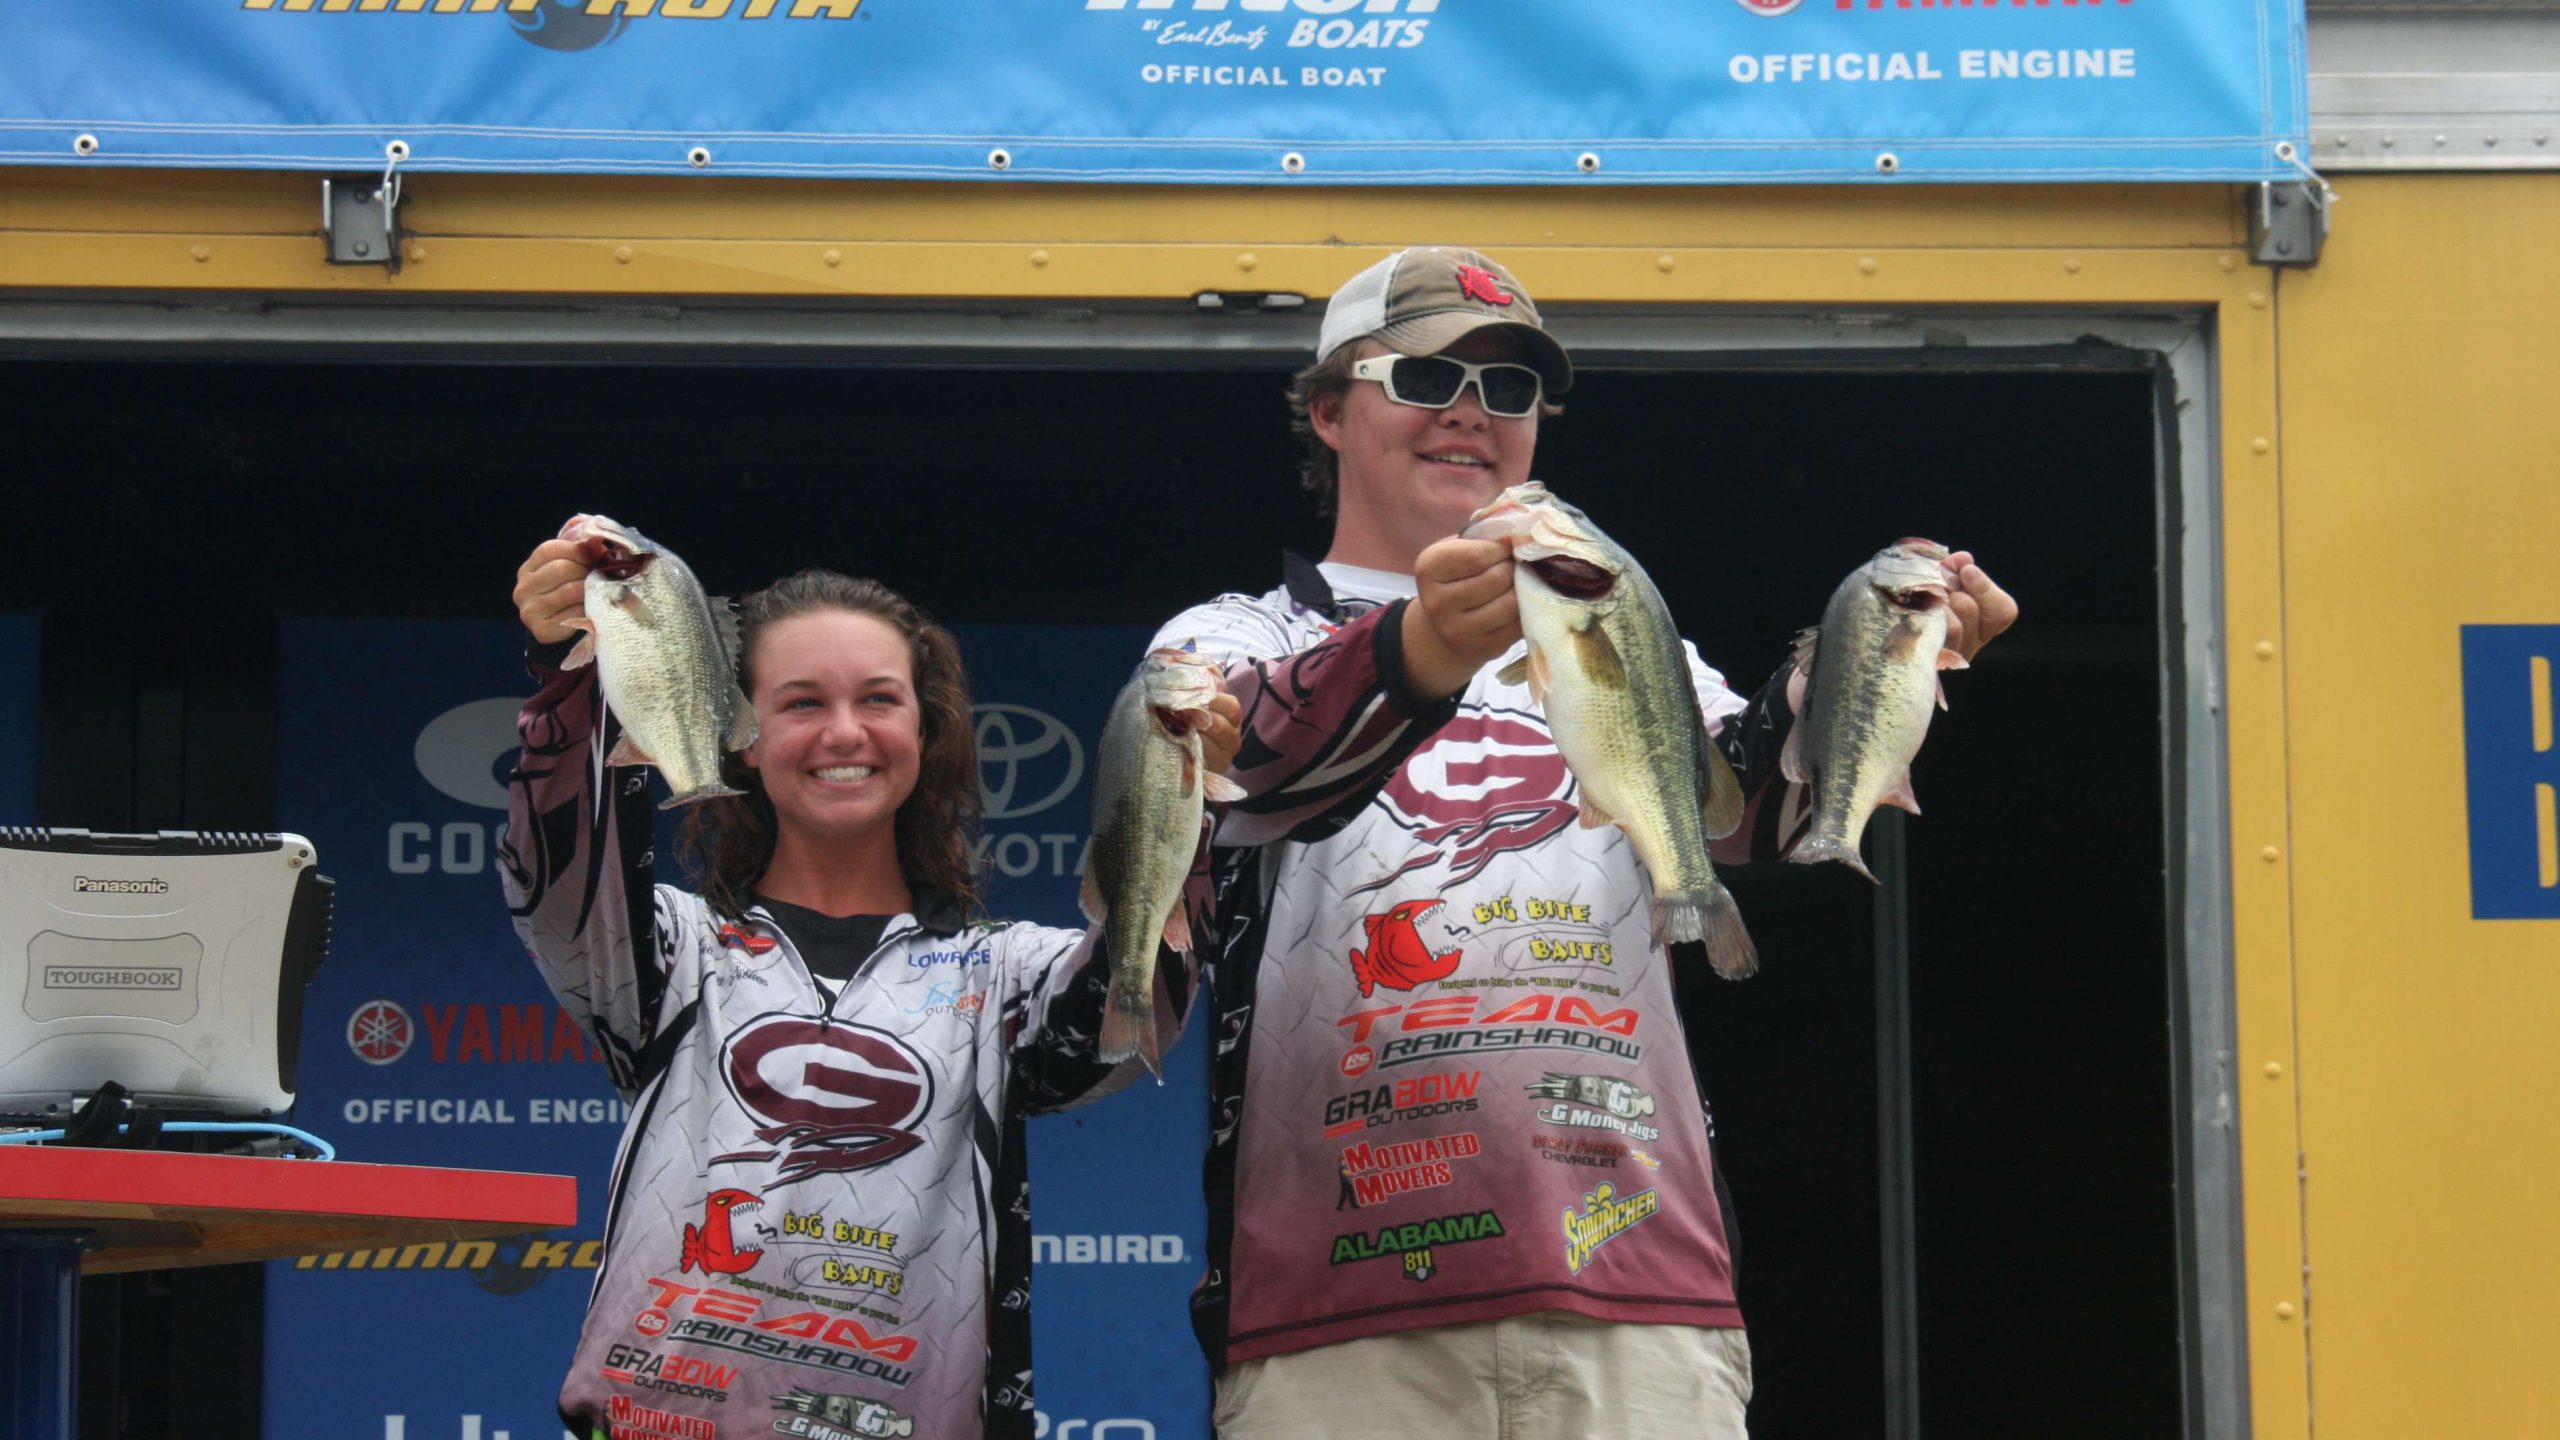 Laura Ann Foshee and Reid Connor of Alabama finished 11th with a 10-2 total.